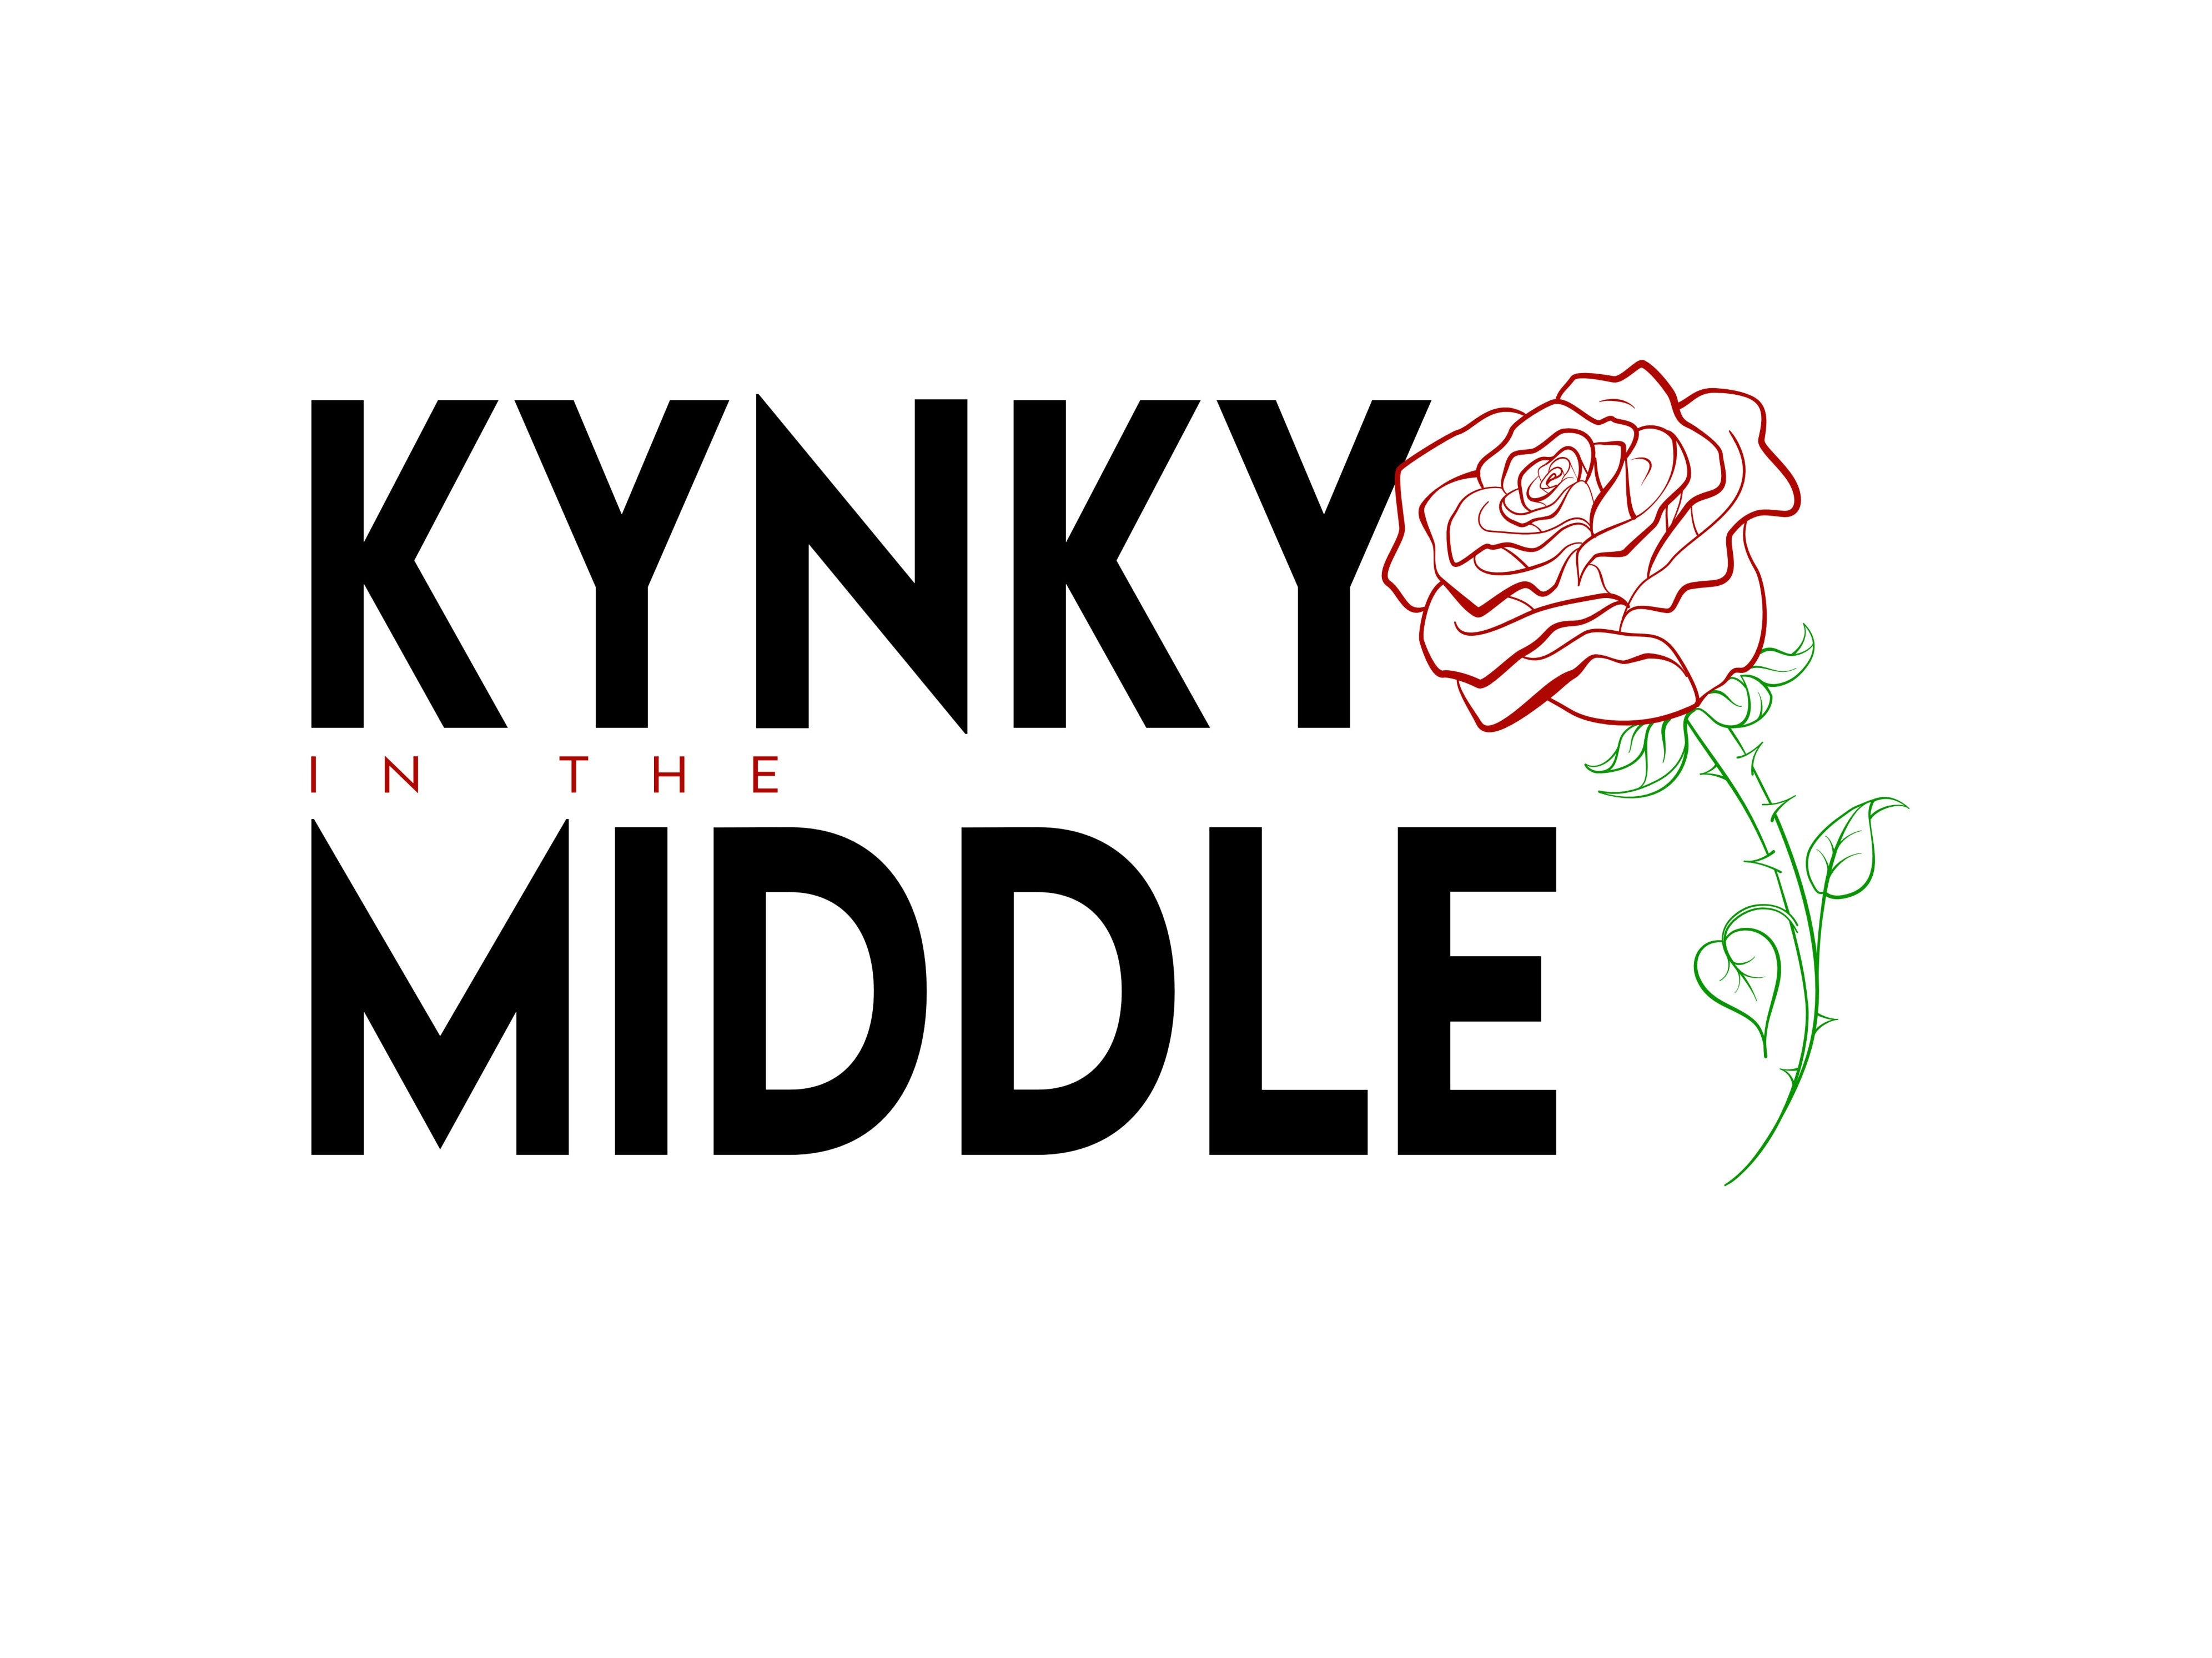 kynky kynky in the middle Rose Roses kinky in the middle kynkyinthemiddle kynky middle kynky toys massage oil Rose toy kynky